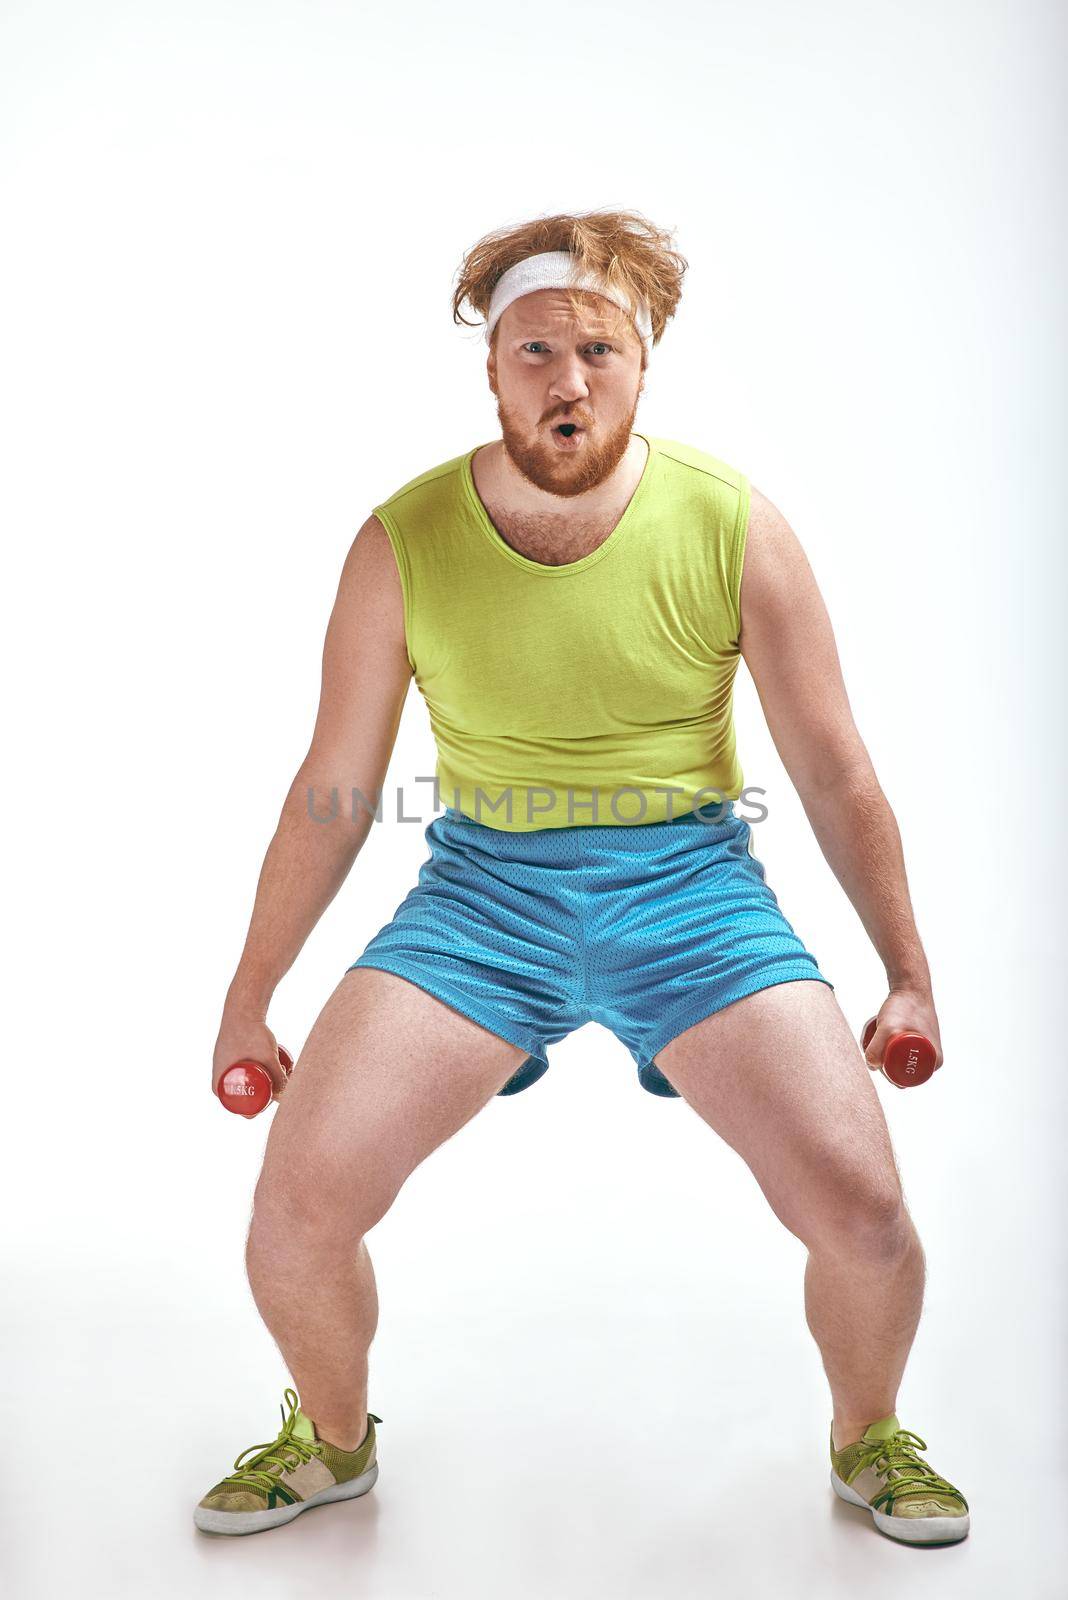 Red haired, bearded, plump man is holding the dumbbells by friendsstock